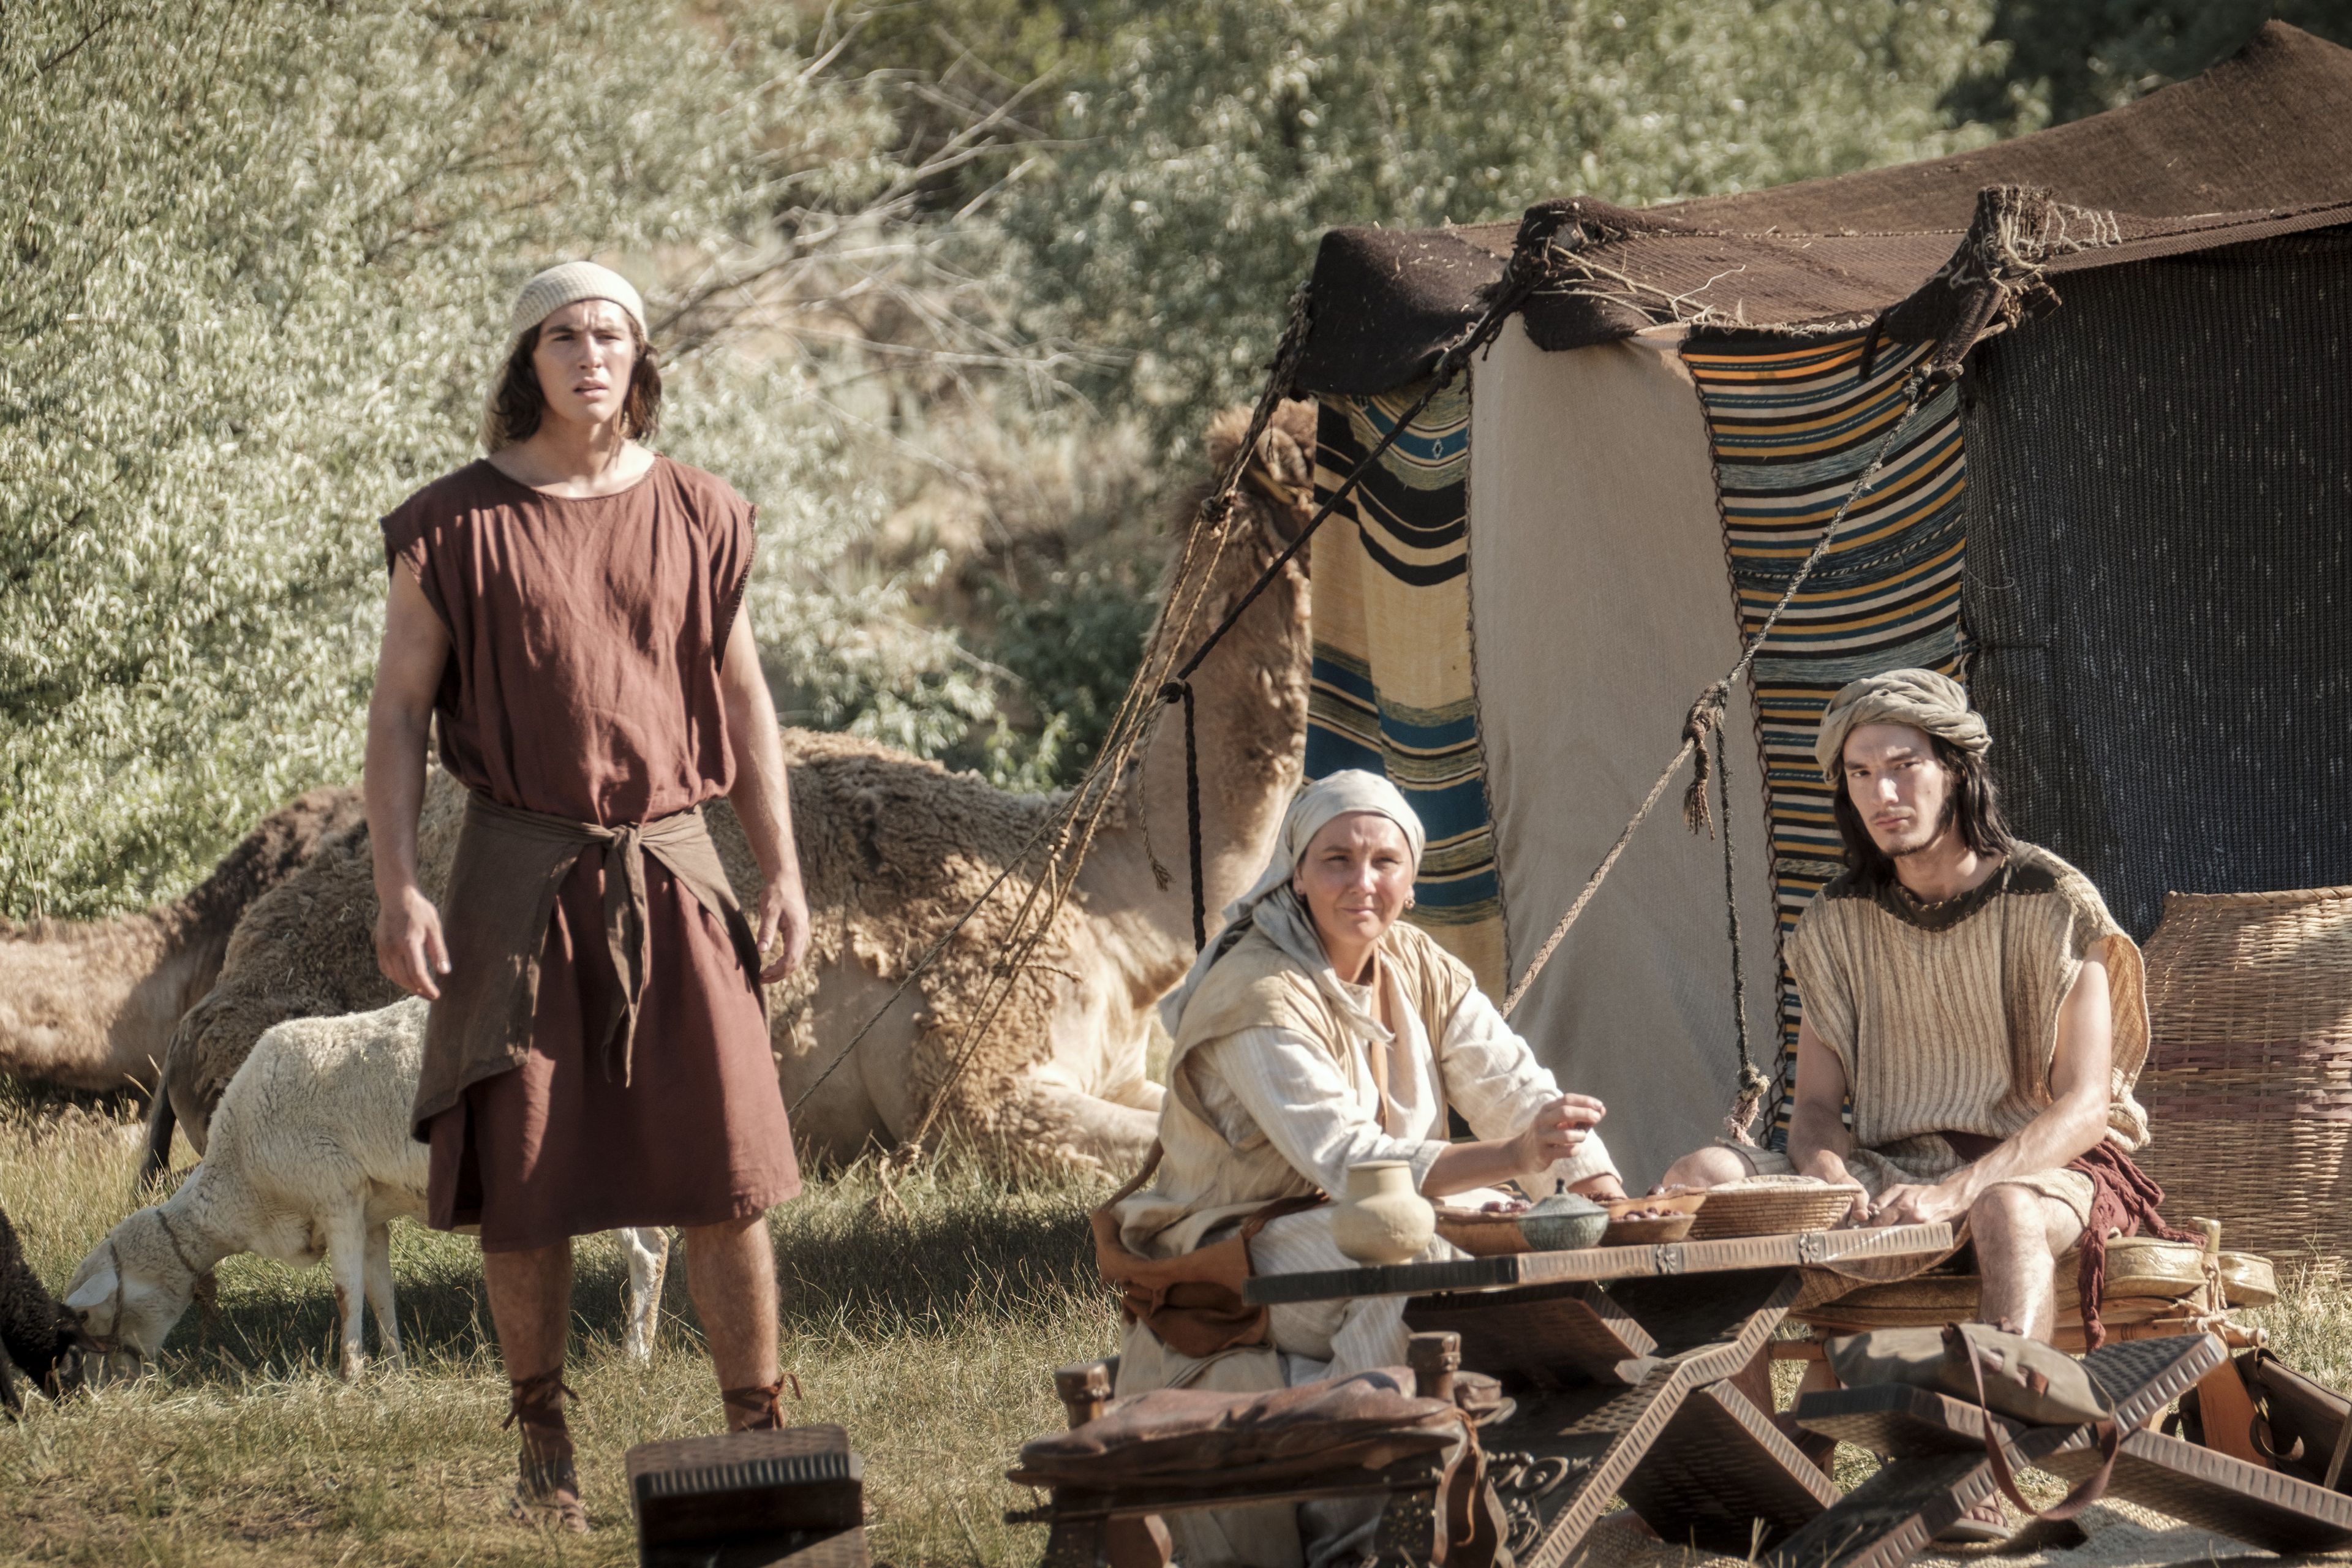 Sariah, Sam, and Nephi talking in Lehi's camp in the wilderness.